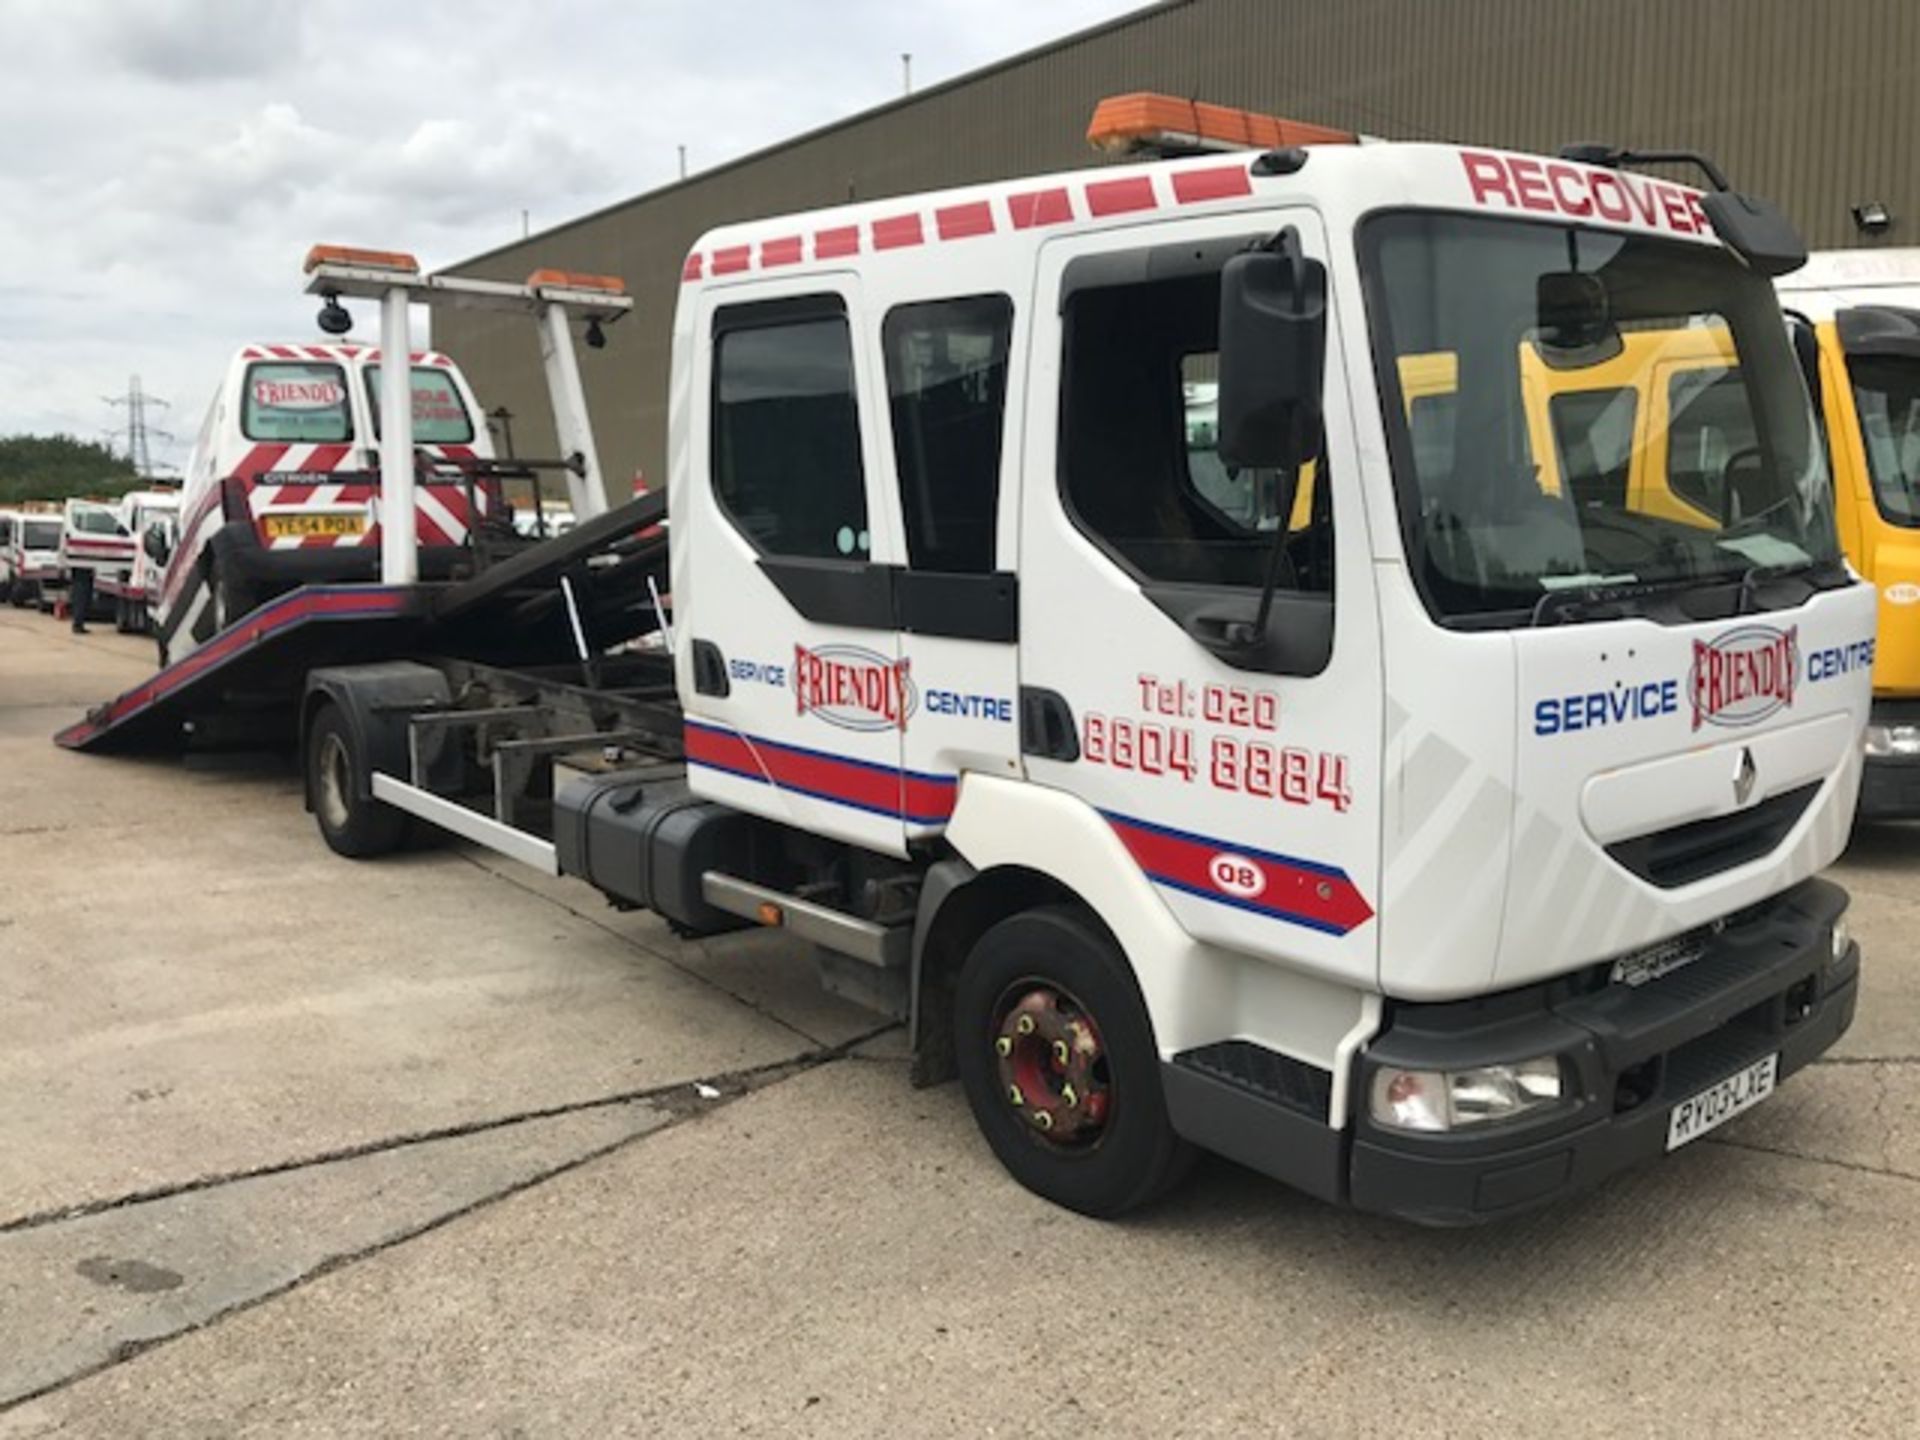 2003 Renault 10t tilt and slide crew cab breakdown recovery vehicle complete with J&J Conversions